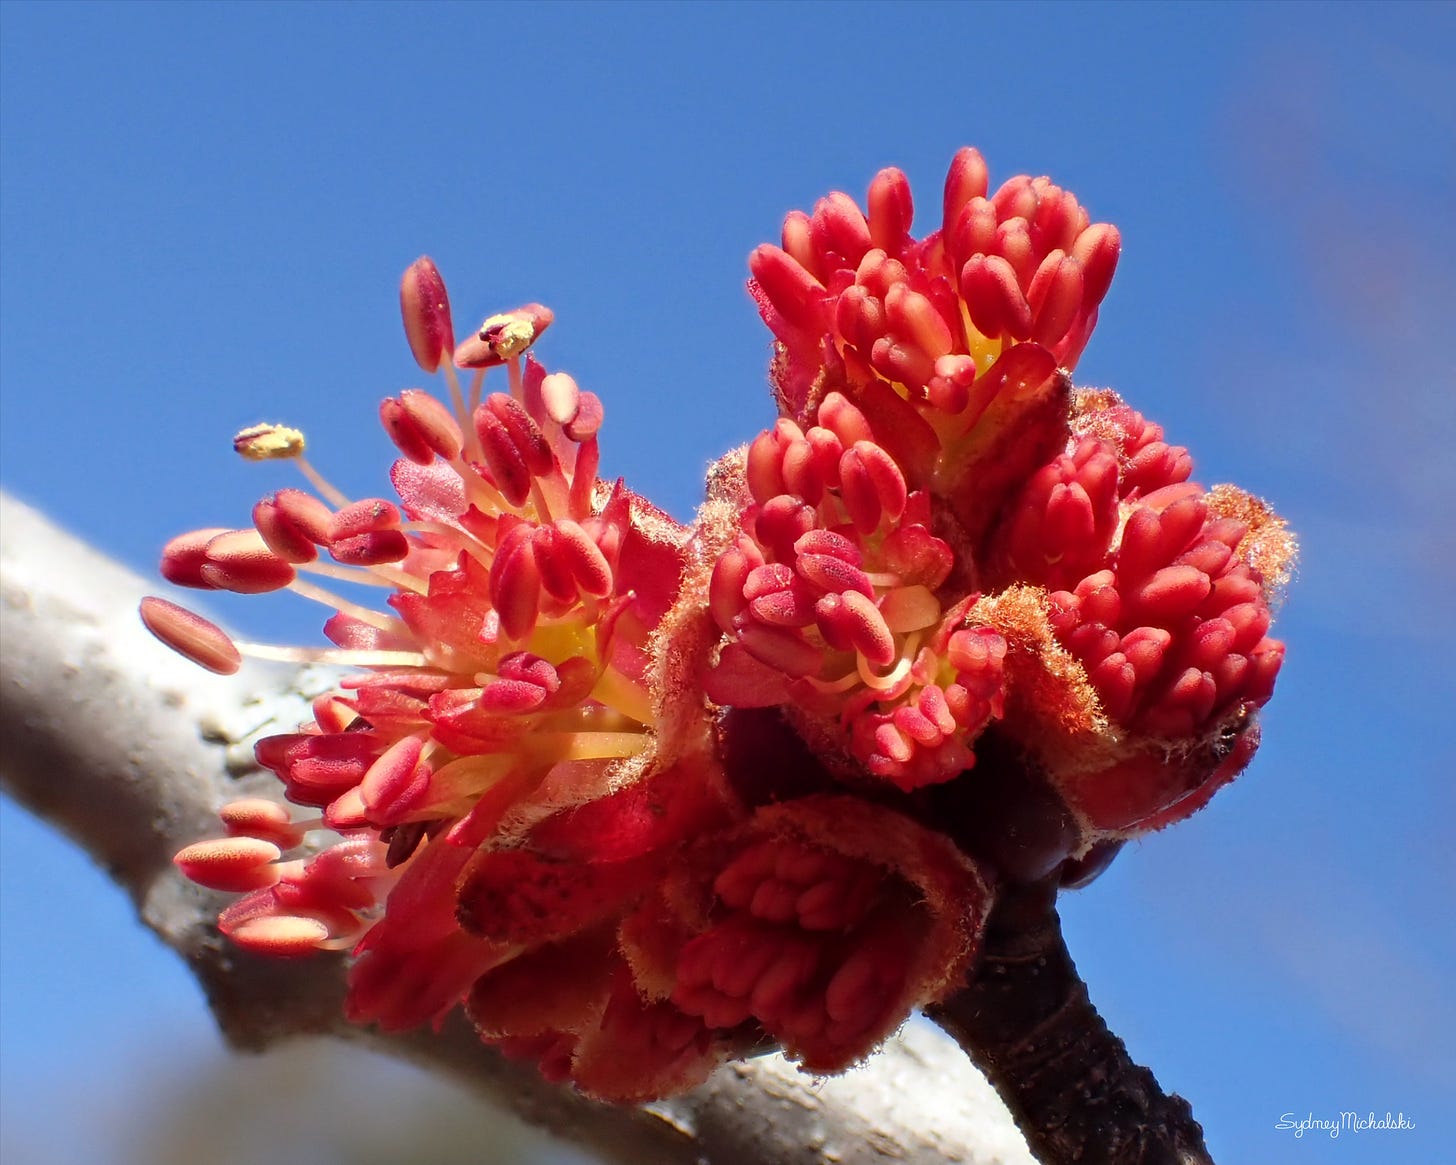 A close-up of a bright red maple blossom against a blue spring sky.